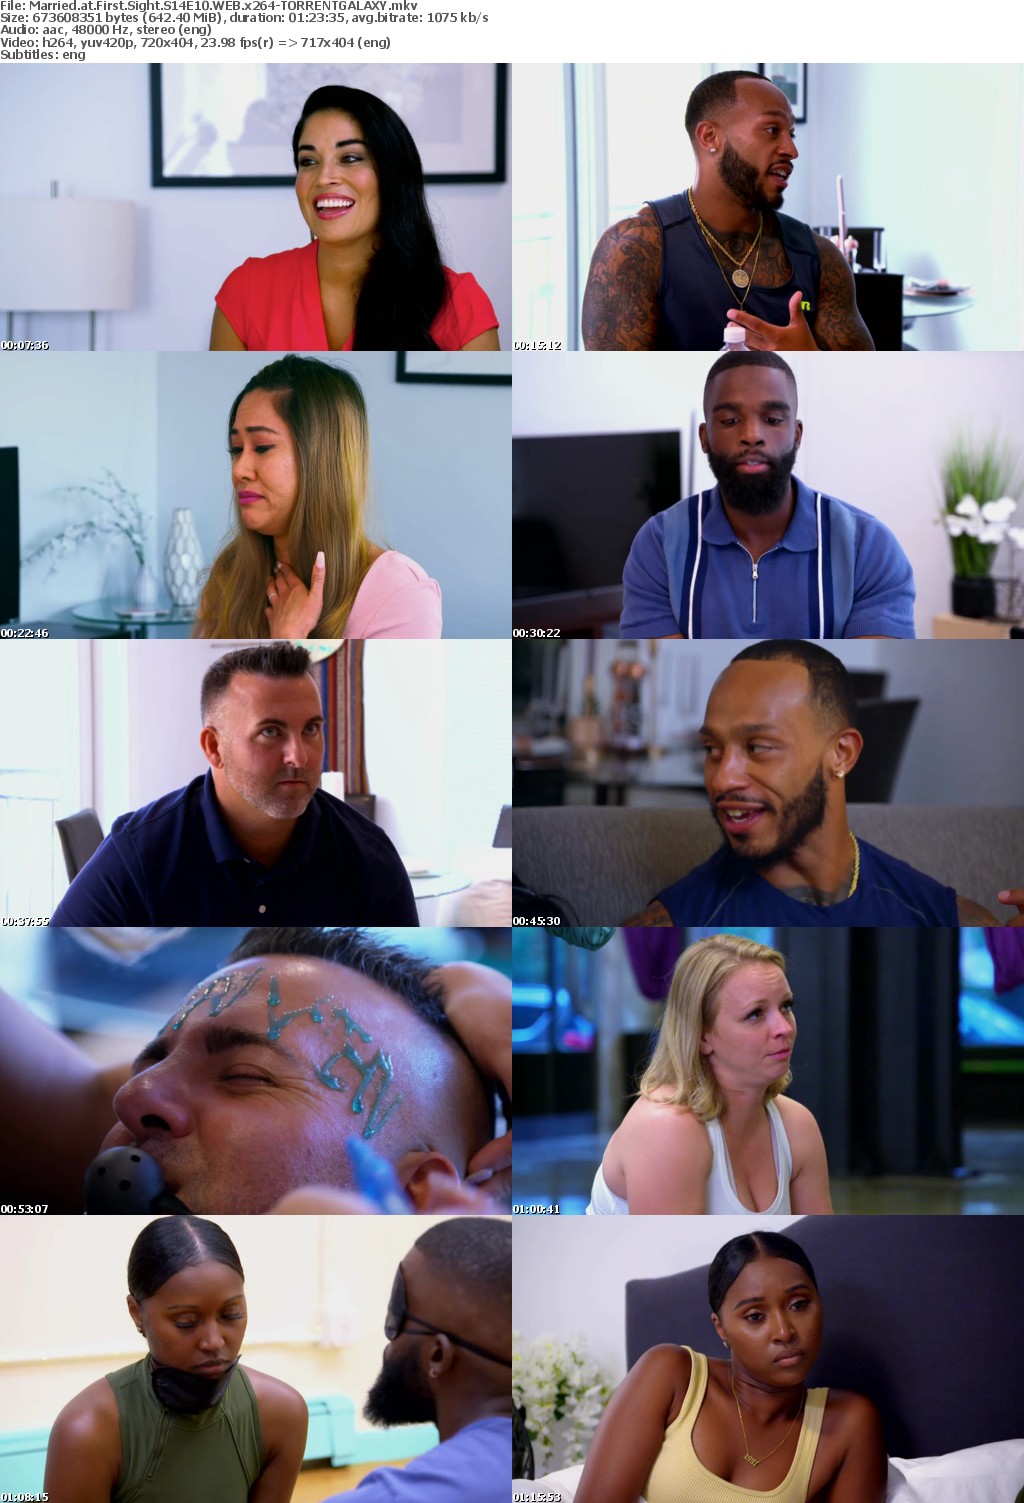 Married at First Sight S14E10 WEB x264-GALAXY